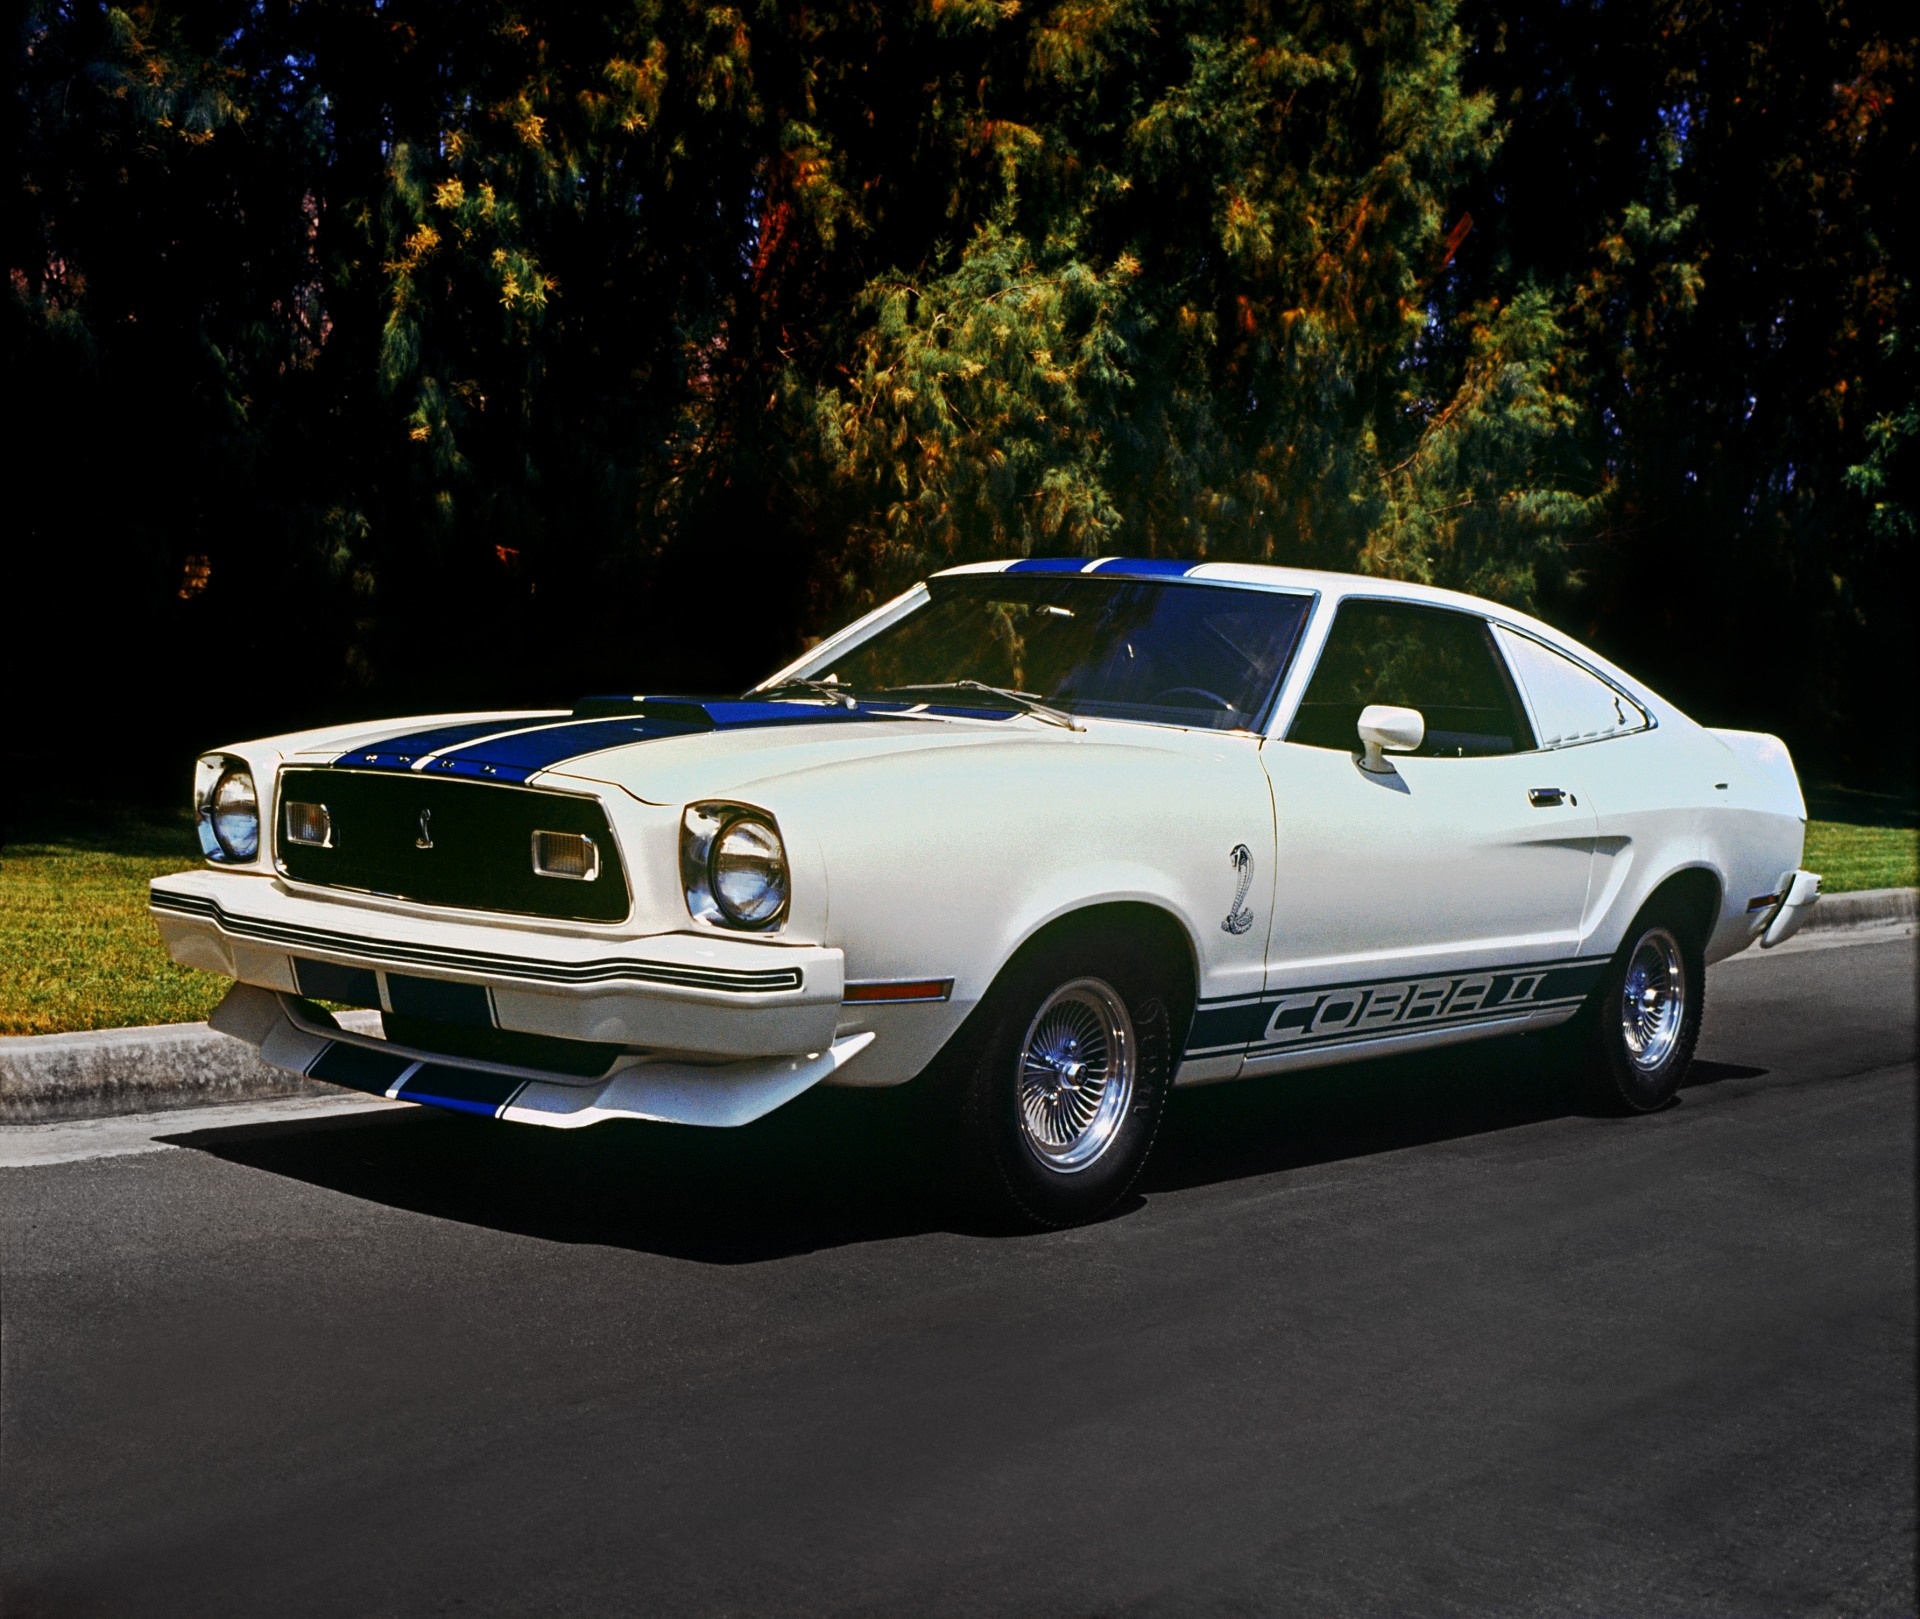 1976 Ford Mustang II